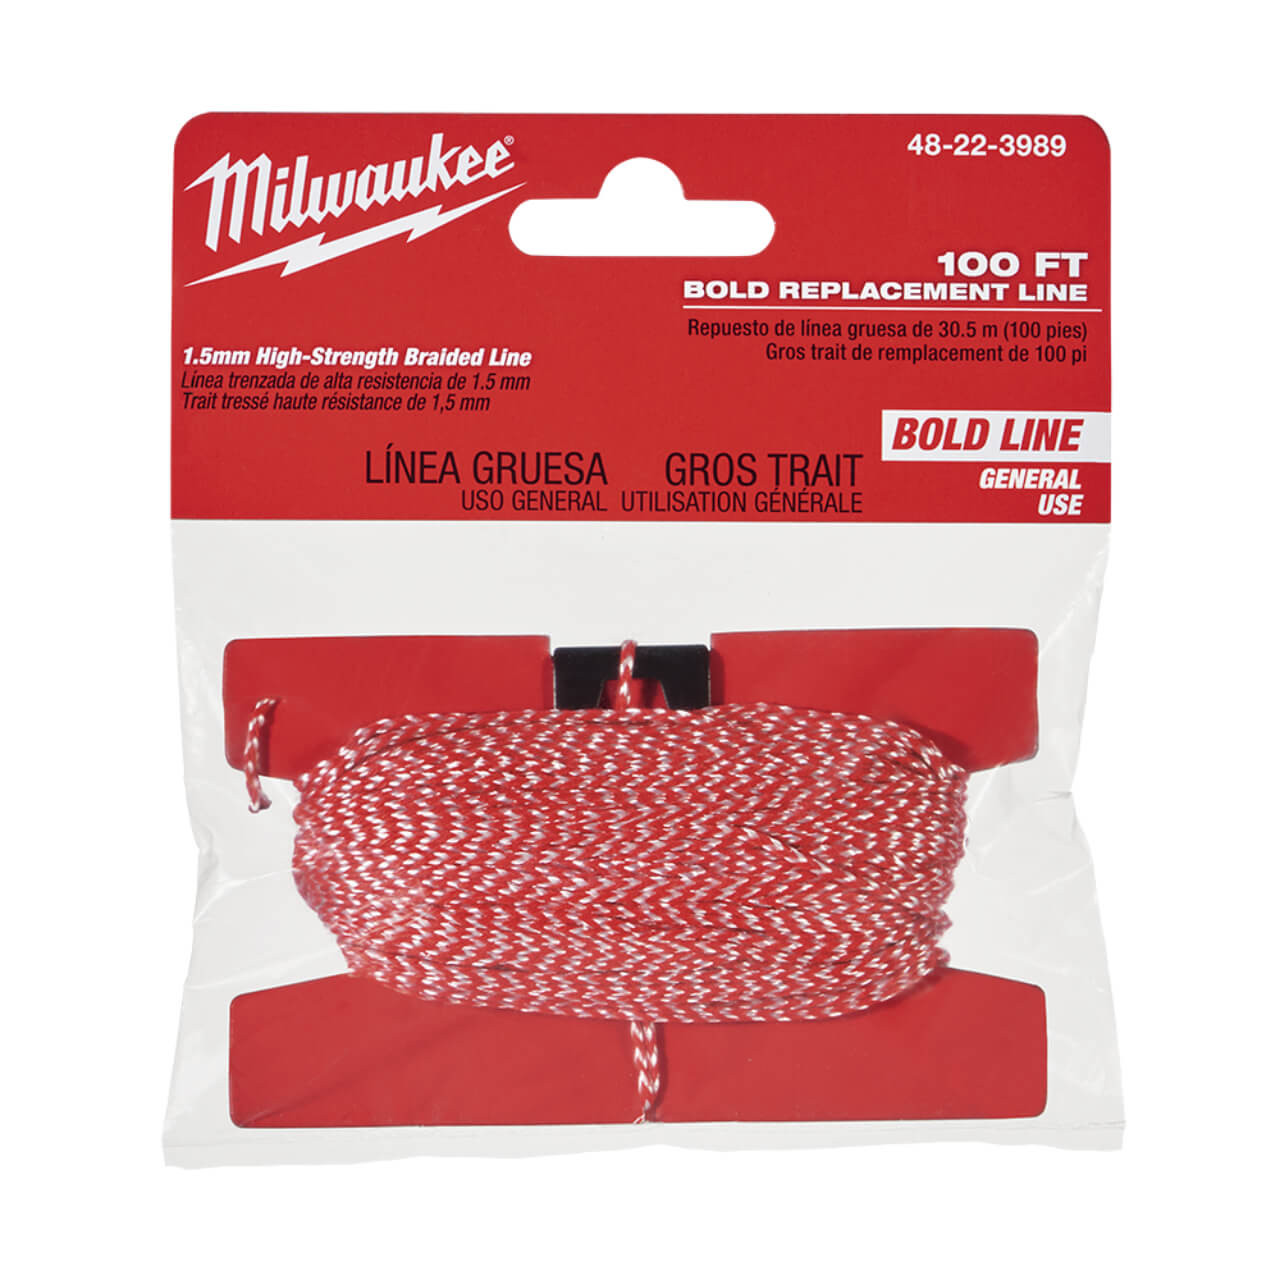 Milwaukee 30m Bold Replacement Line